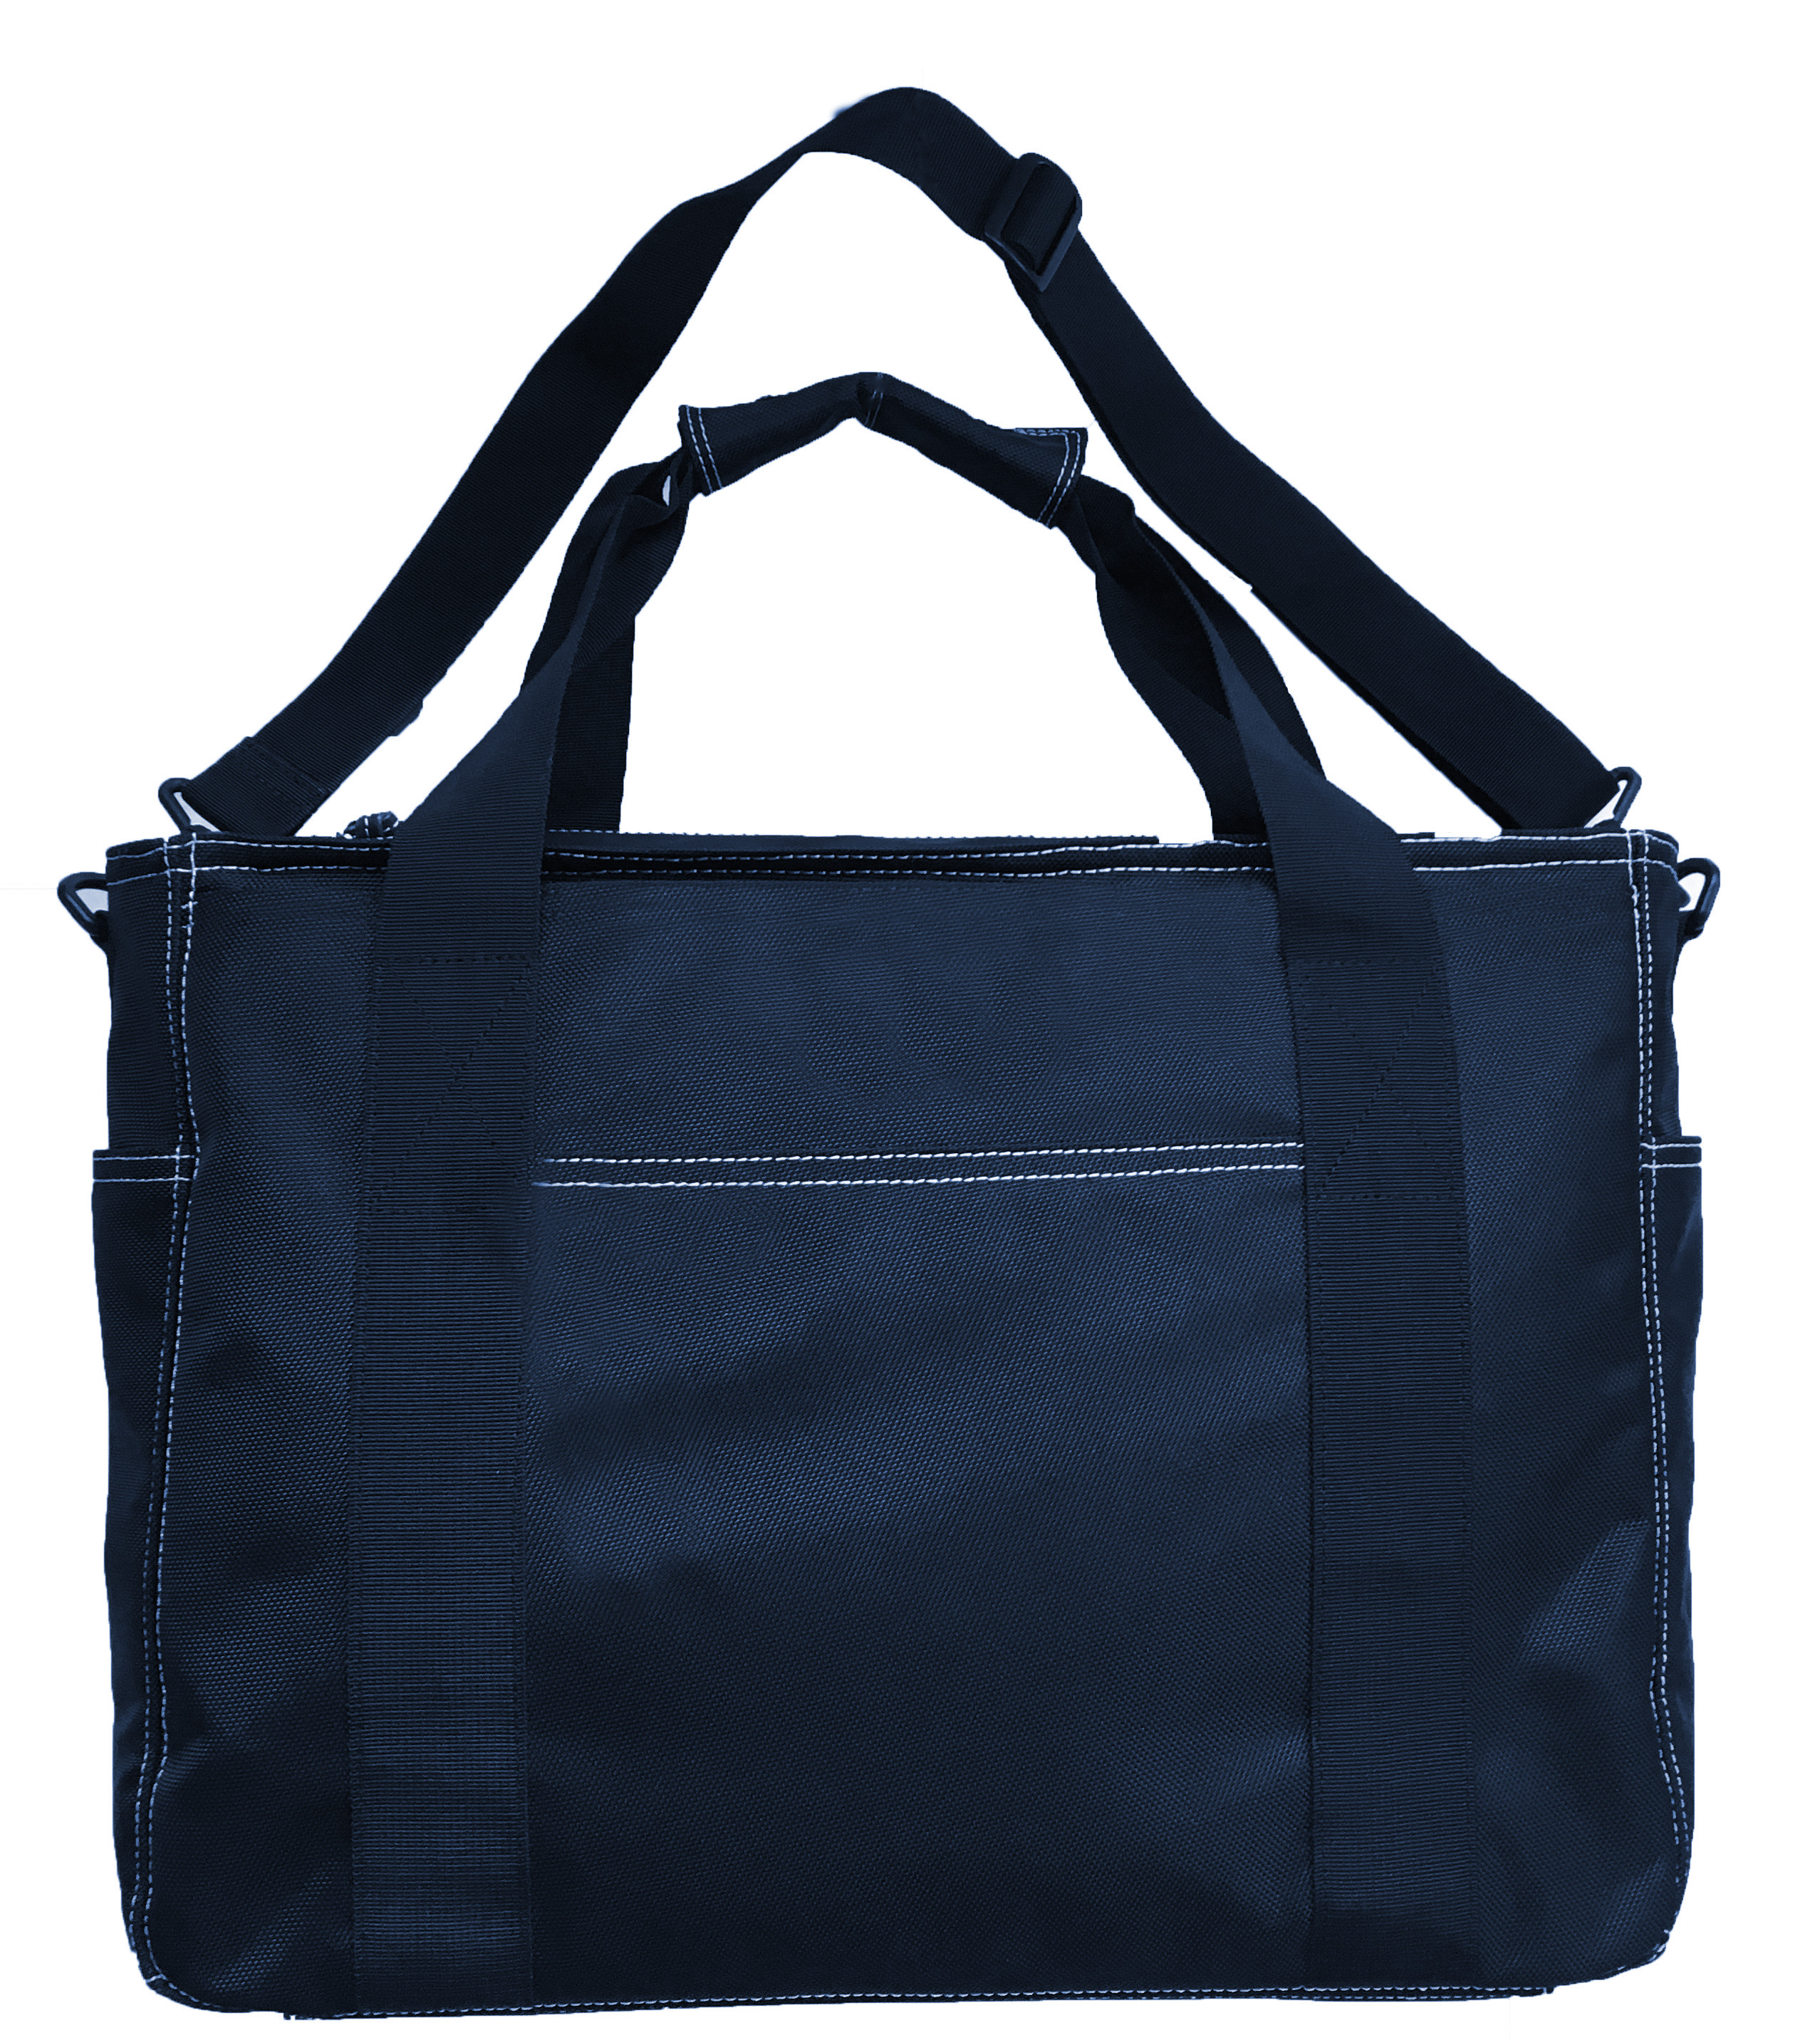 Maggie Mather Sport Tote Pickelball/Tennis Bag (Navy)